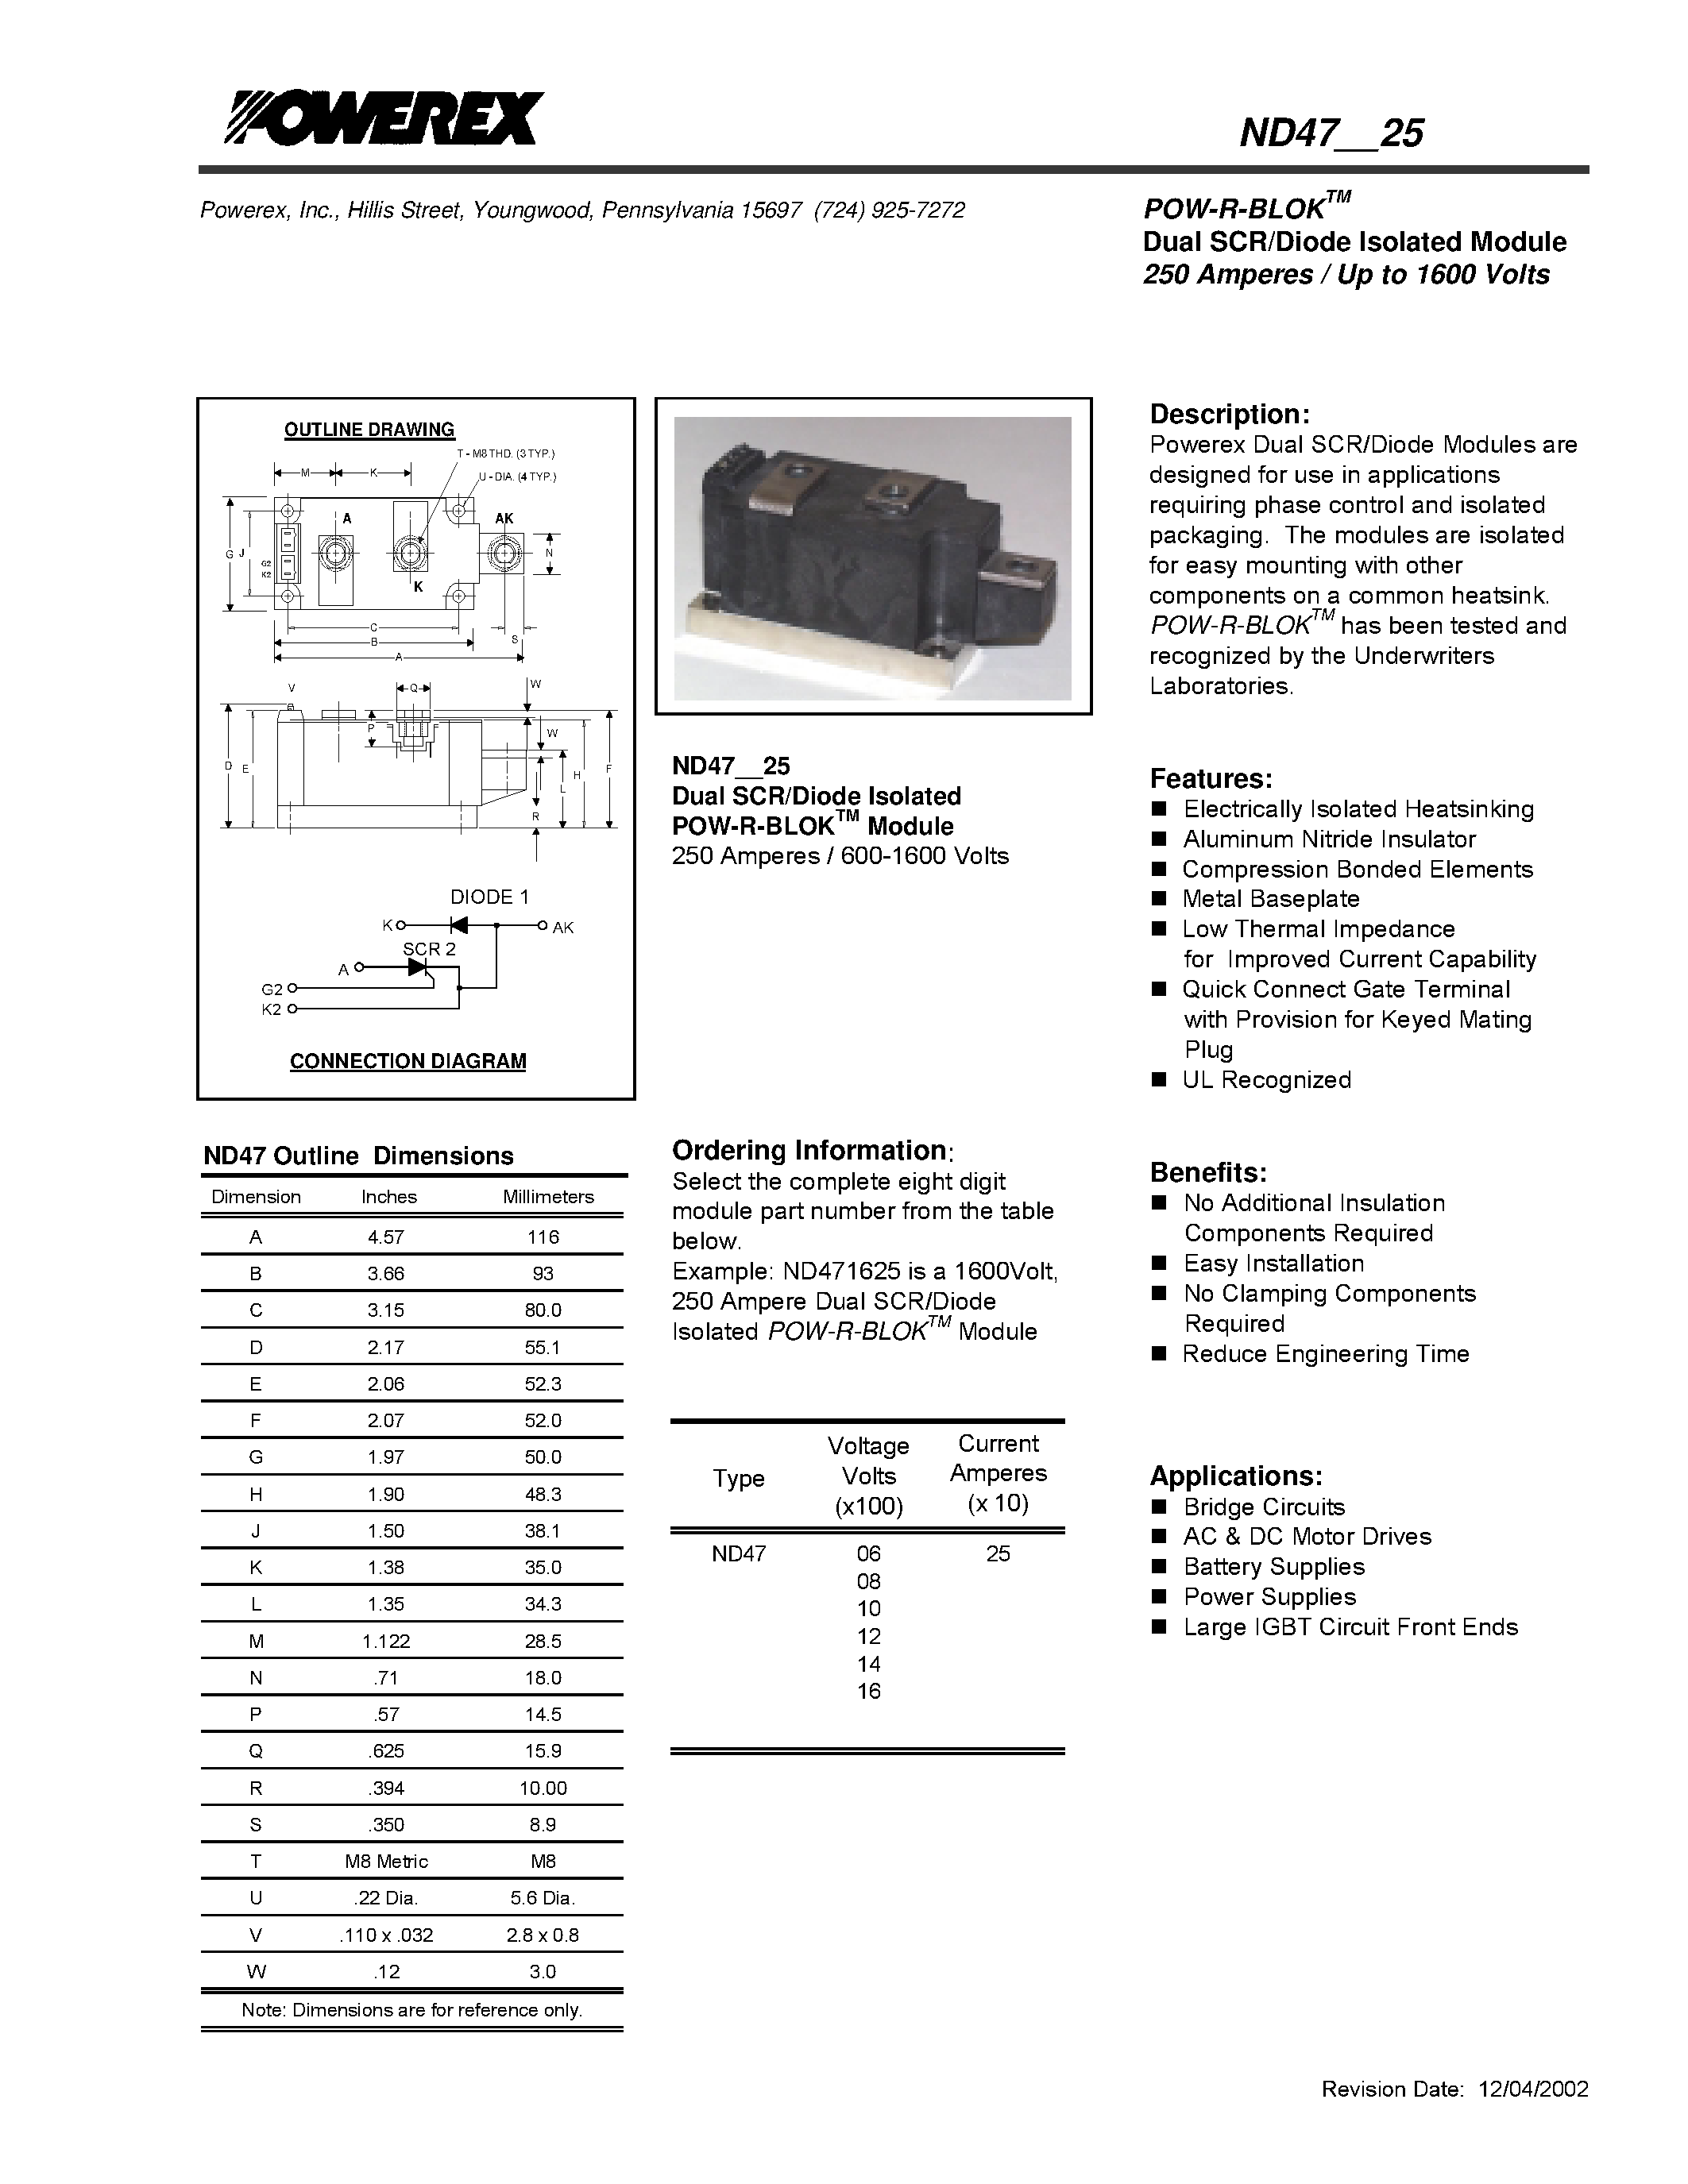 Datasheet ND471425 - POW-R-BLOK Dual SCR/Diode Isolated Module (250 Amperes / Up to 1600 Volts) page 1